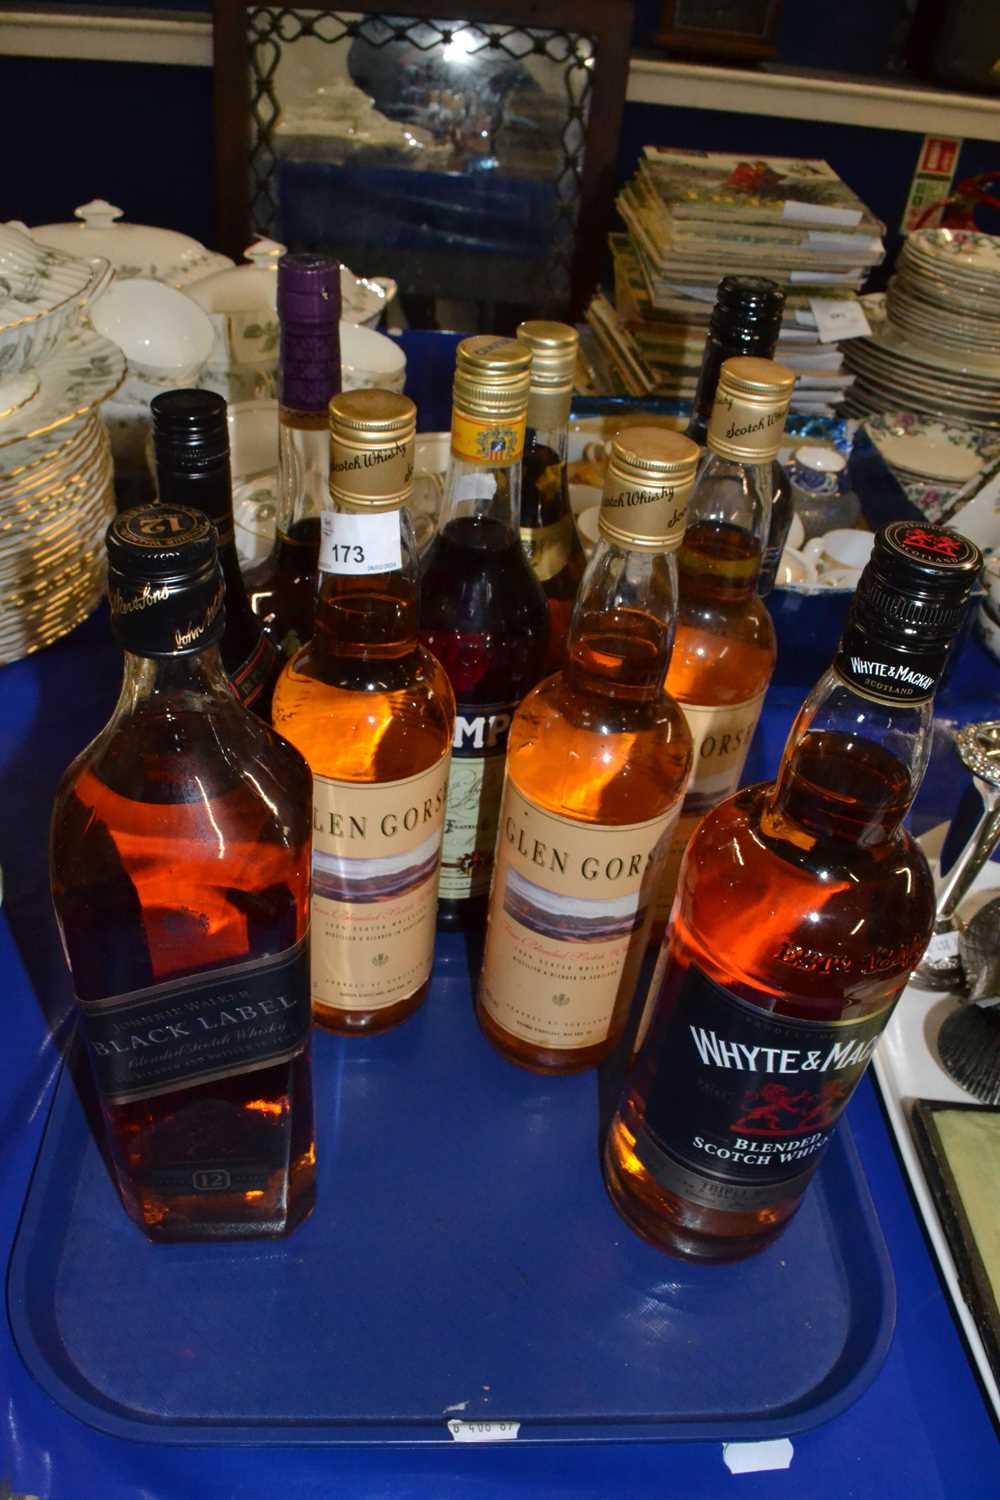 Mixed Lot: Ten various bottles of Whisky and spirits to include Glengorse, Whyte & Mackay, Johnnie